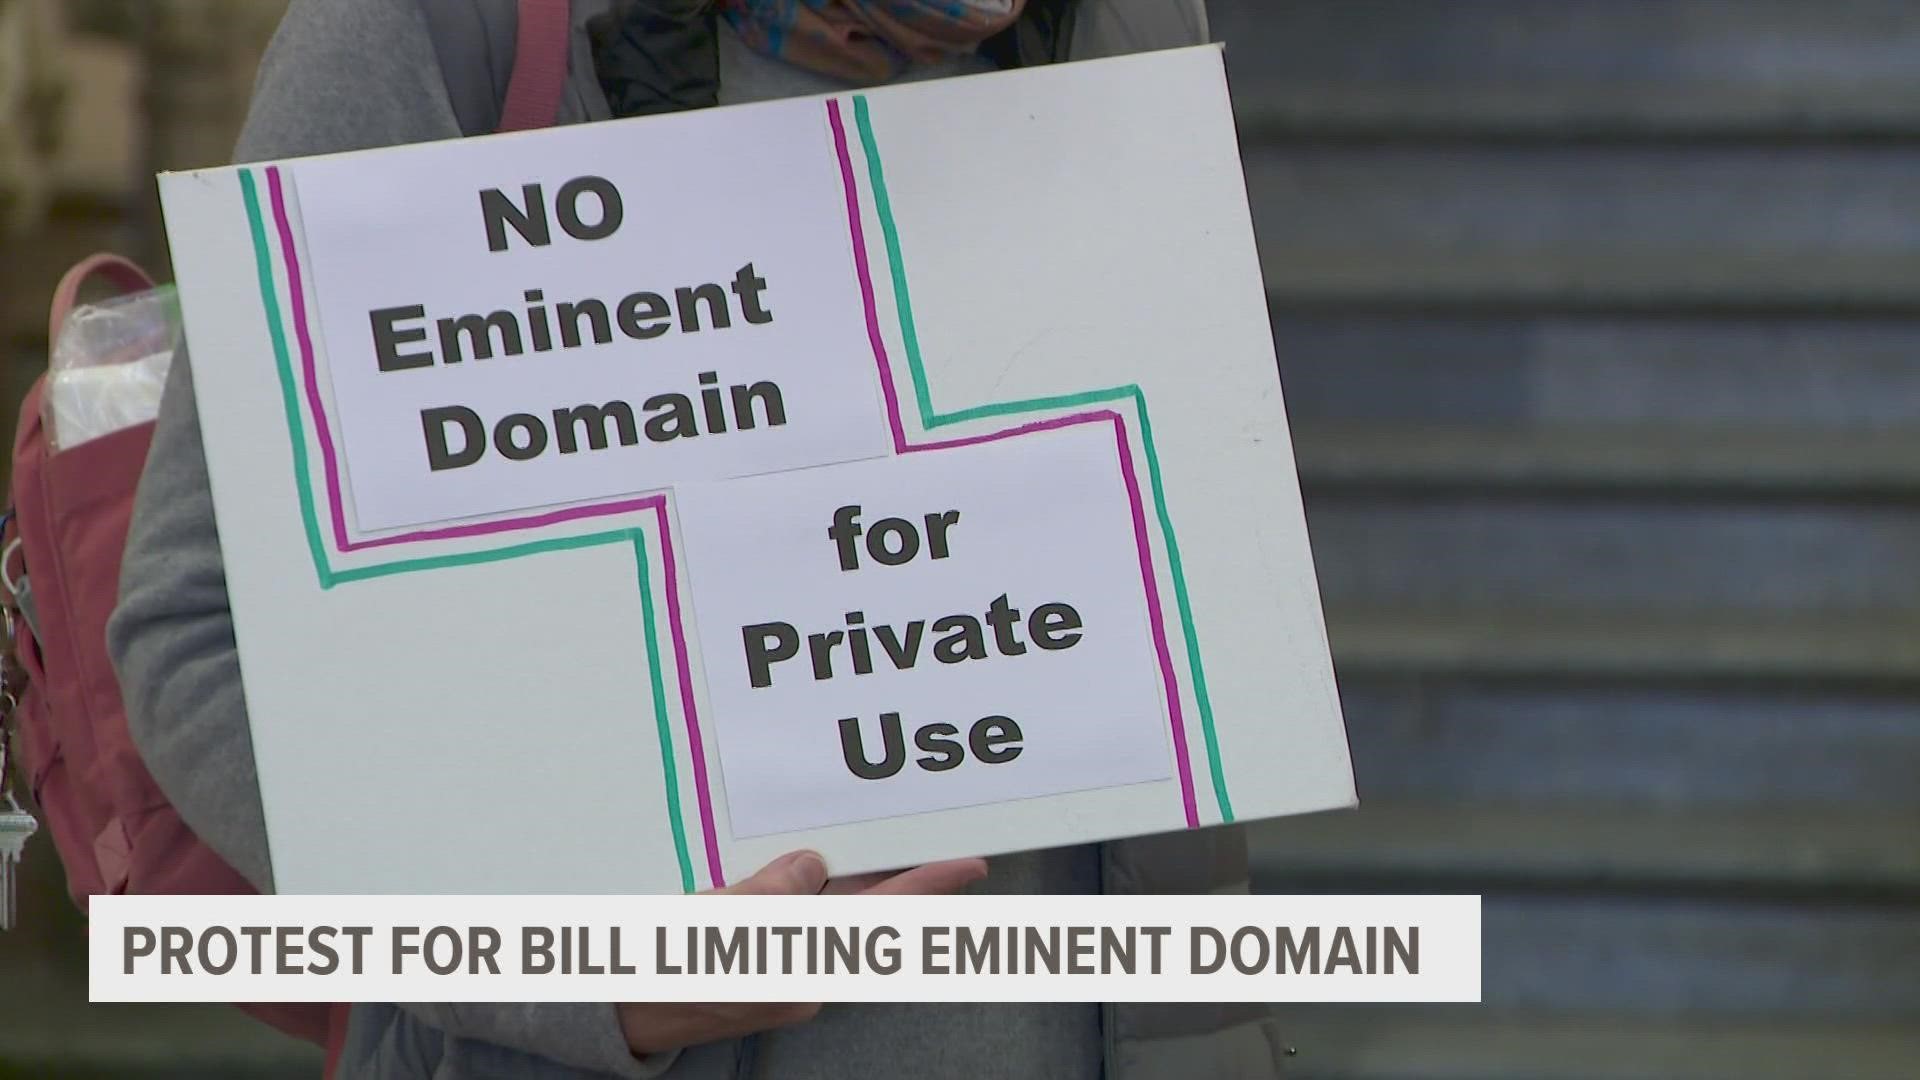 A bill to limit eminent domain in Iowa did not make it out of committee this week.